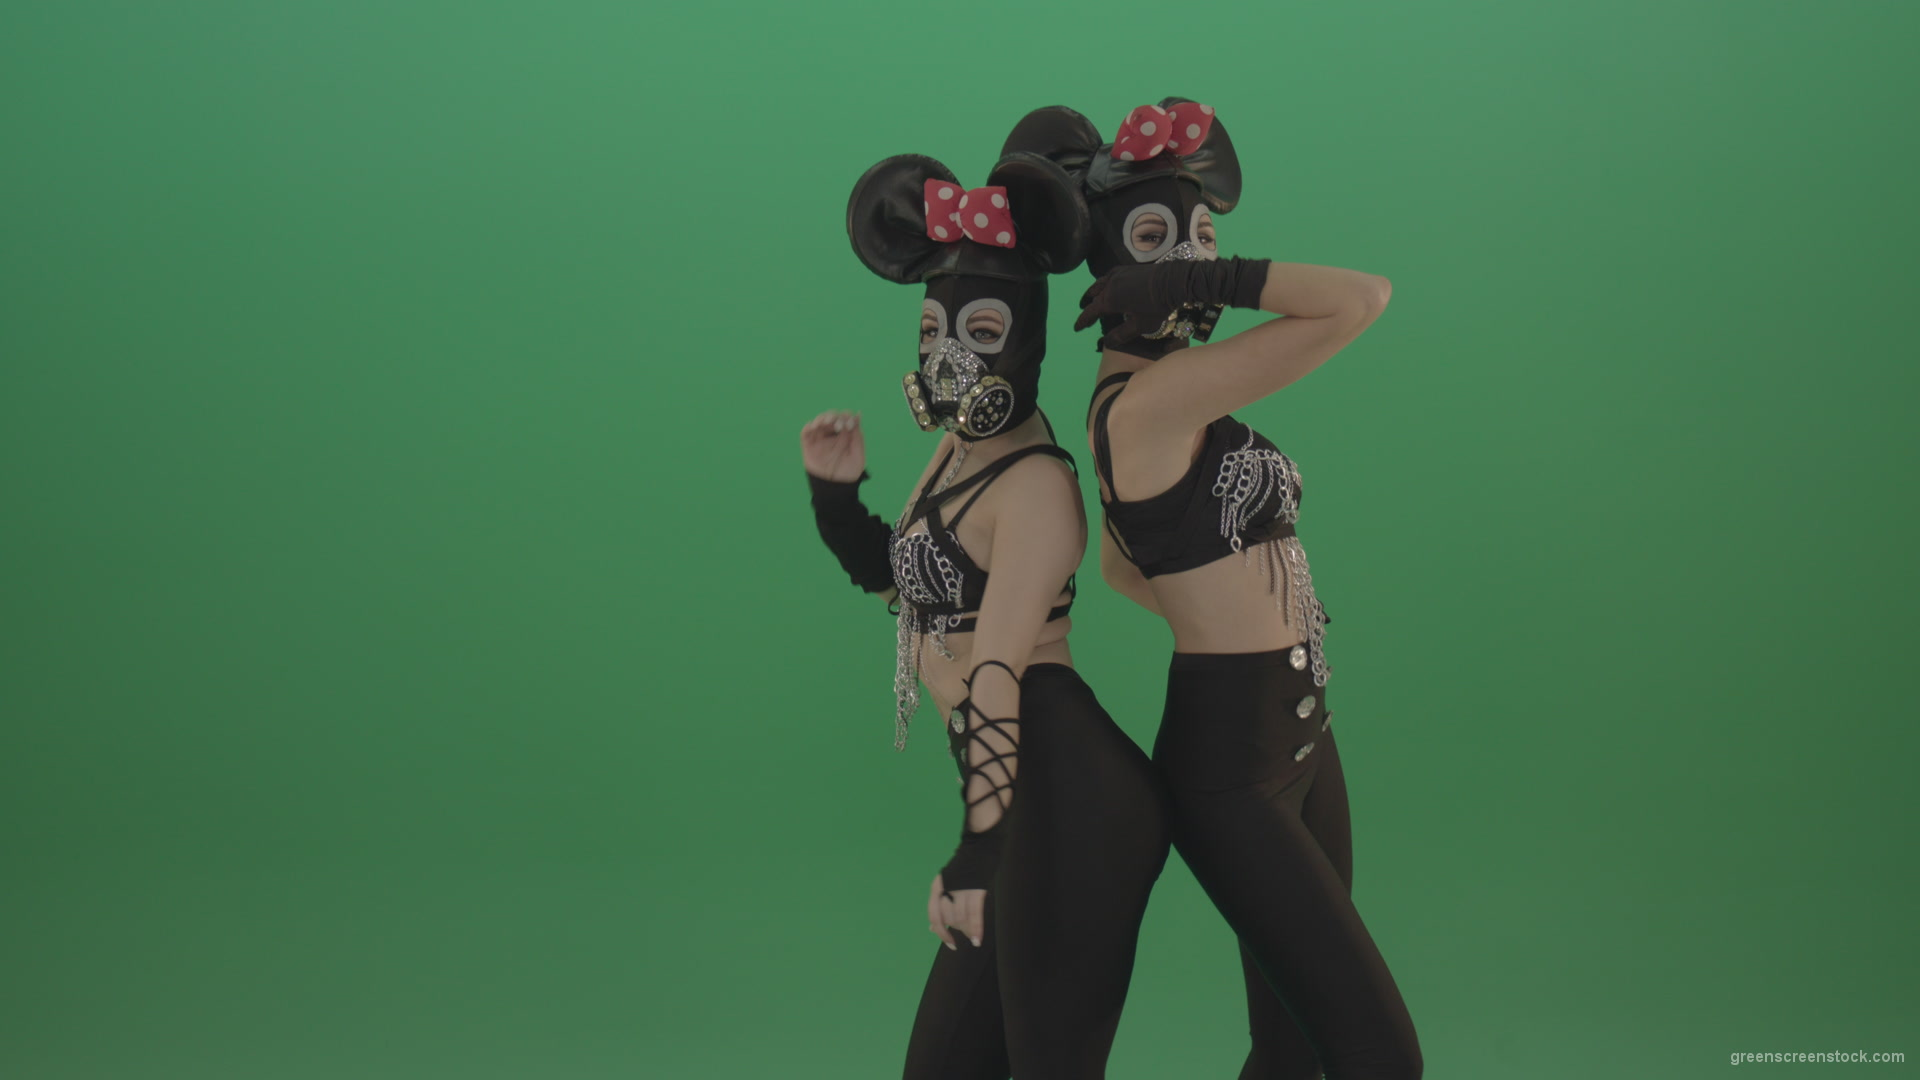 Girls-dressed-Mickey-Mouse-dance-well-on-green-screen_001 Green Screen Stock